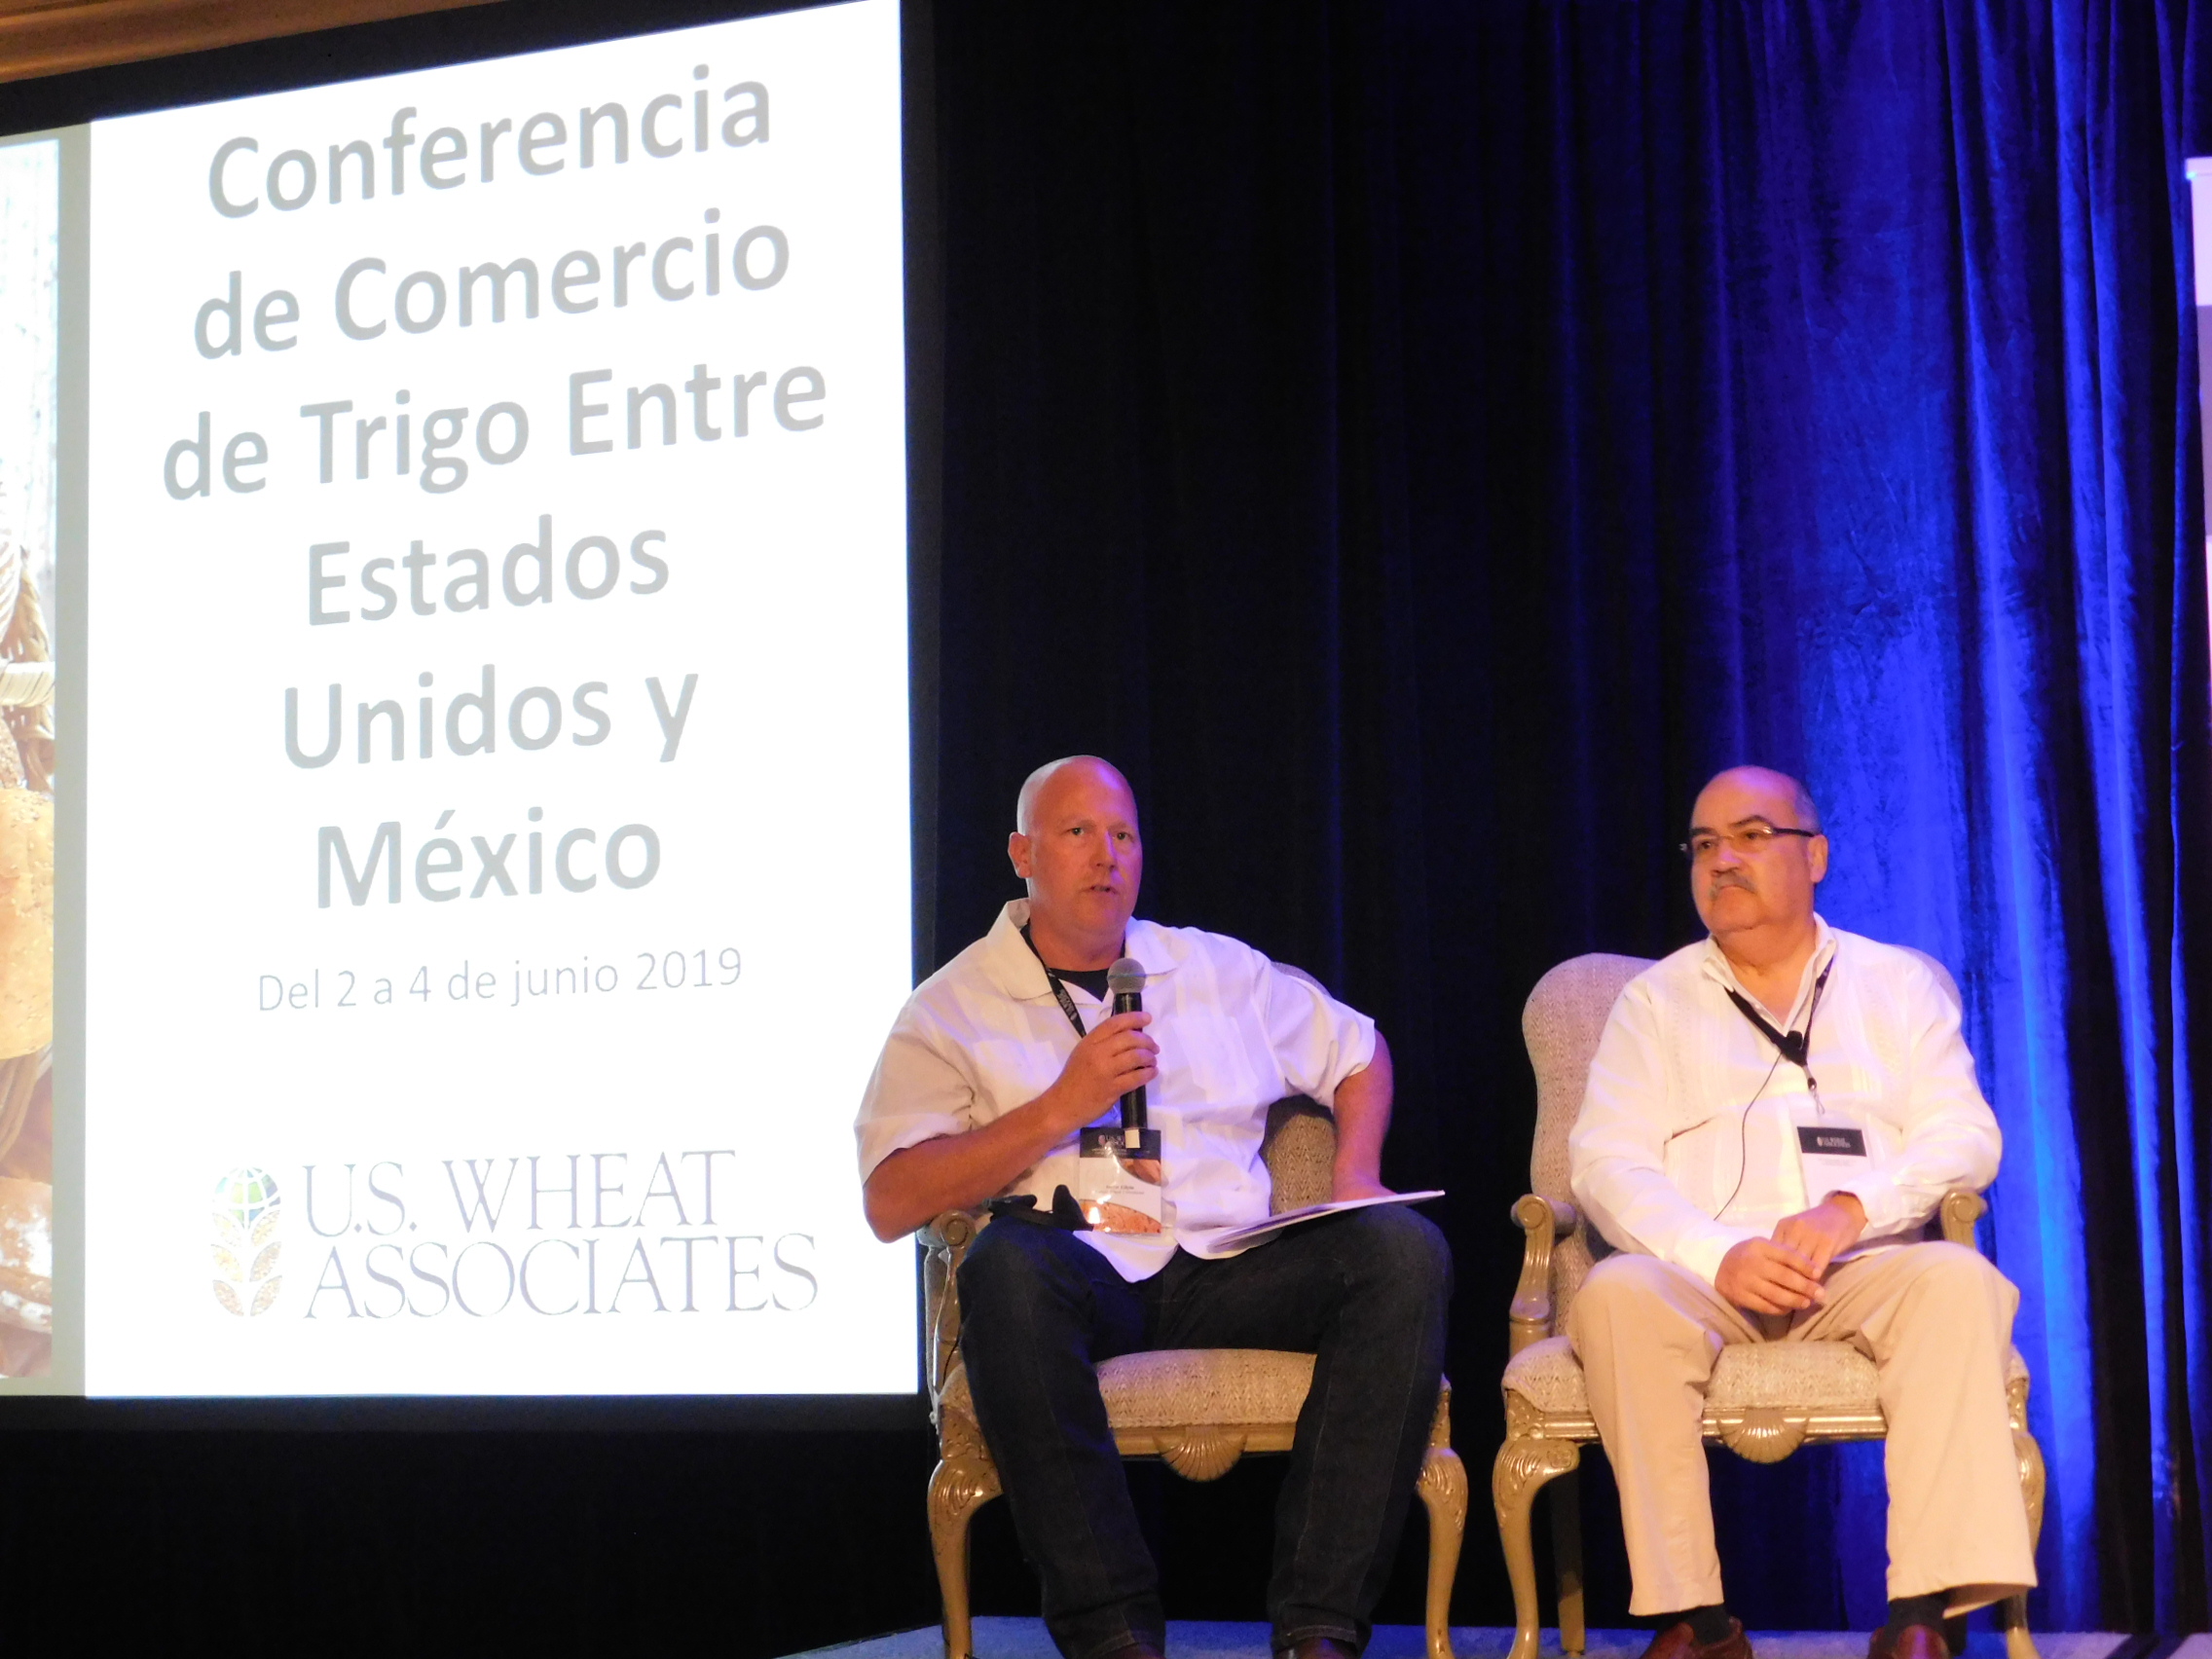 Panel discussion speakers: Justin Gilpin, CEO, Kansas Wheat; and Luis Olivera, Executive Vice President Sales, Ferromex, Mexico City.